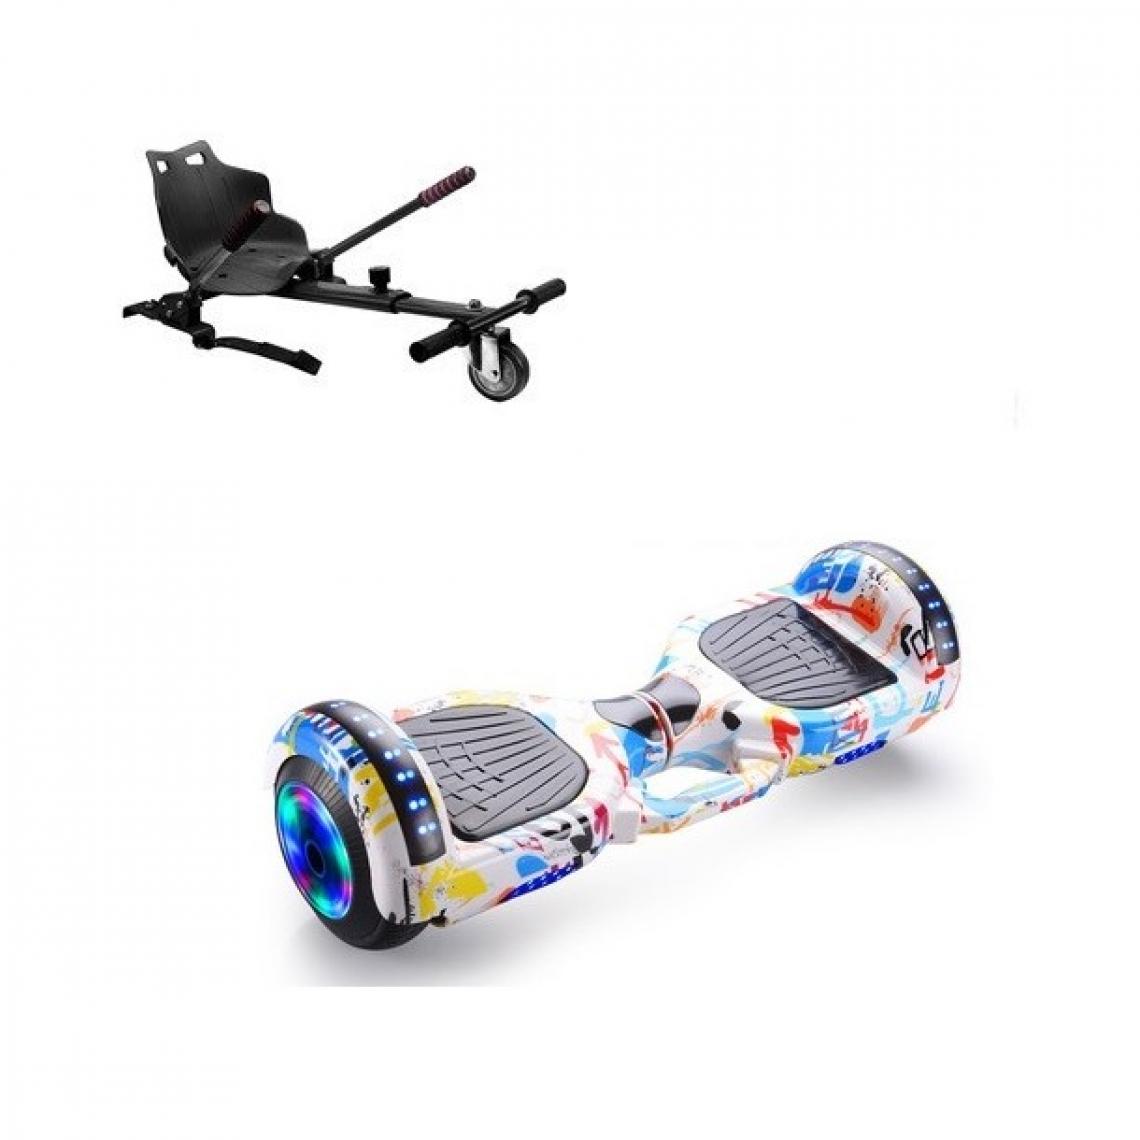 Air Rise - Hoverboard 6.5 Pouces LED Graffiti Blanc + hoverkart noir - Hoverboard